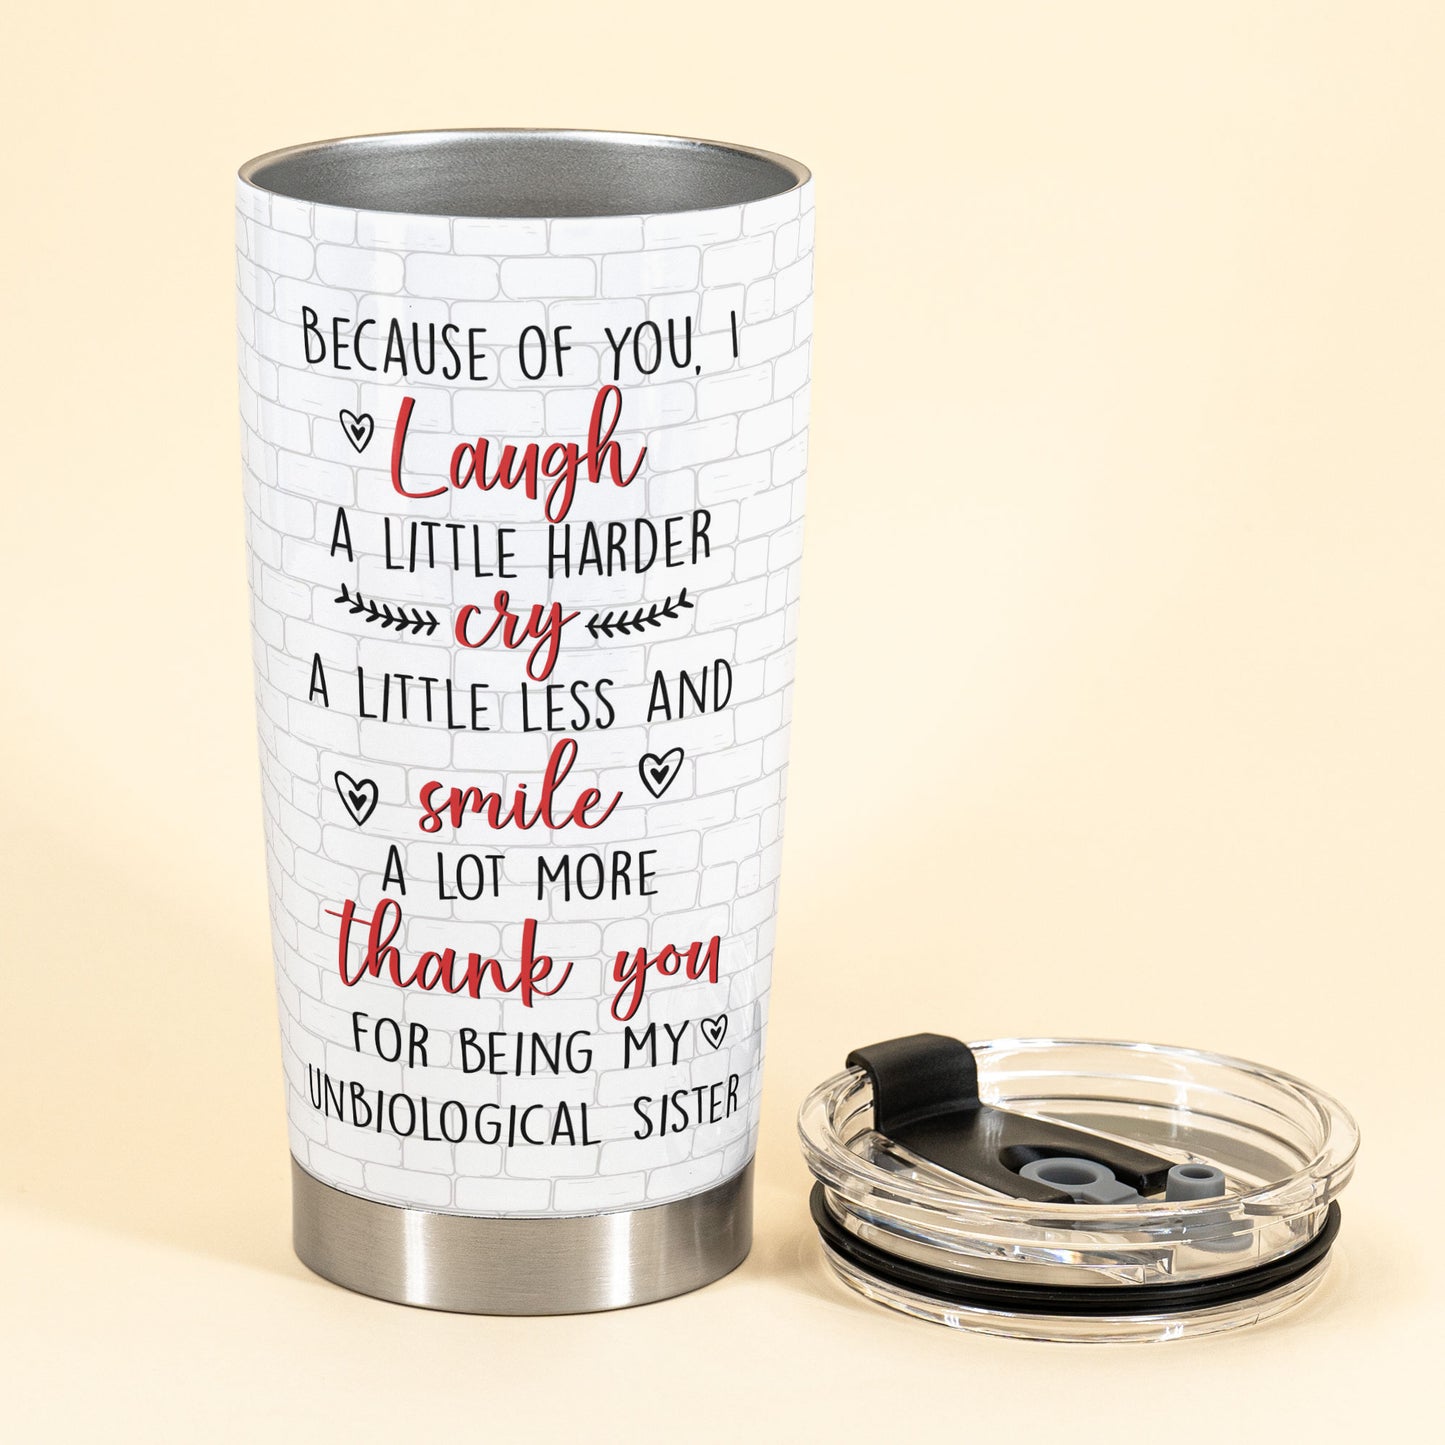 Besties Forever - Personalized Tumbler Cup - Birthday, Loving Gift For Besties, Best Friends, Bff